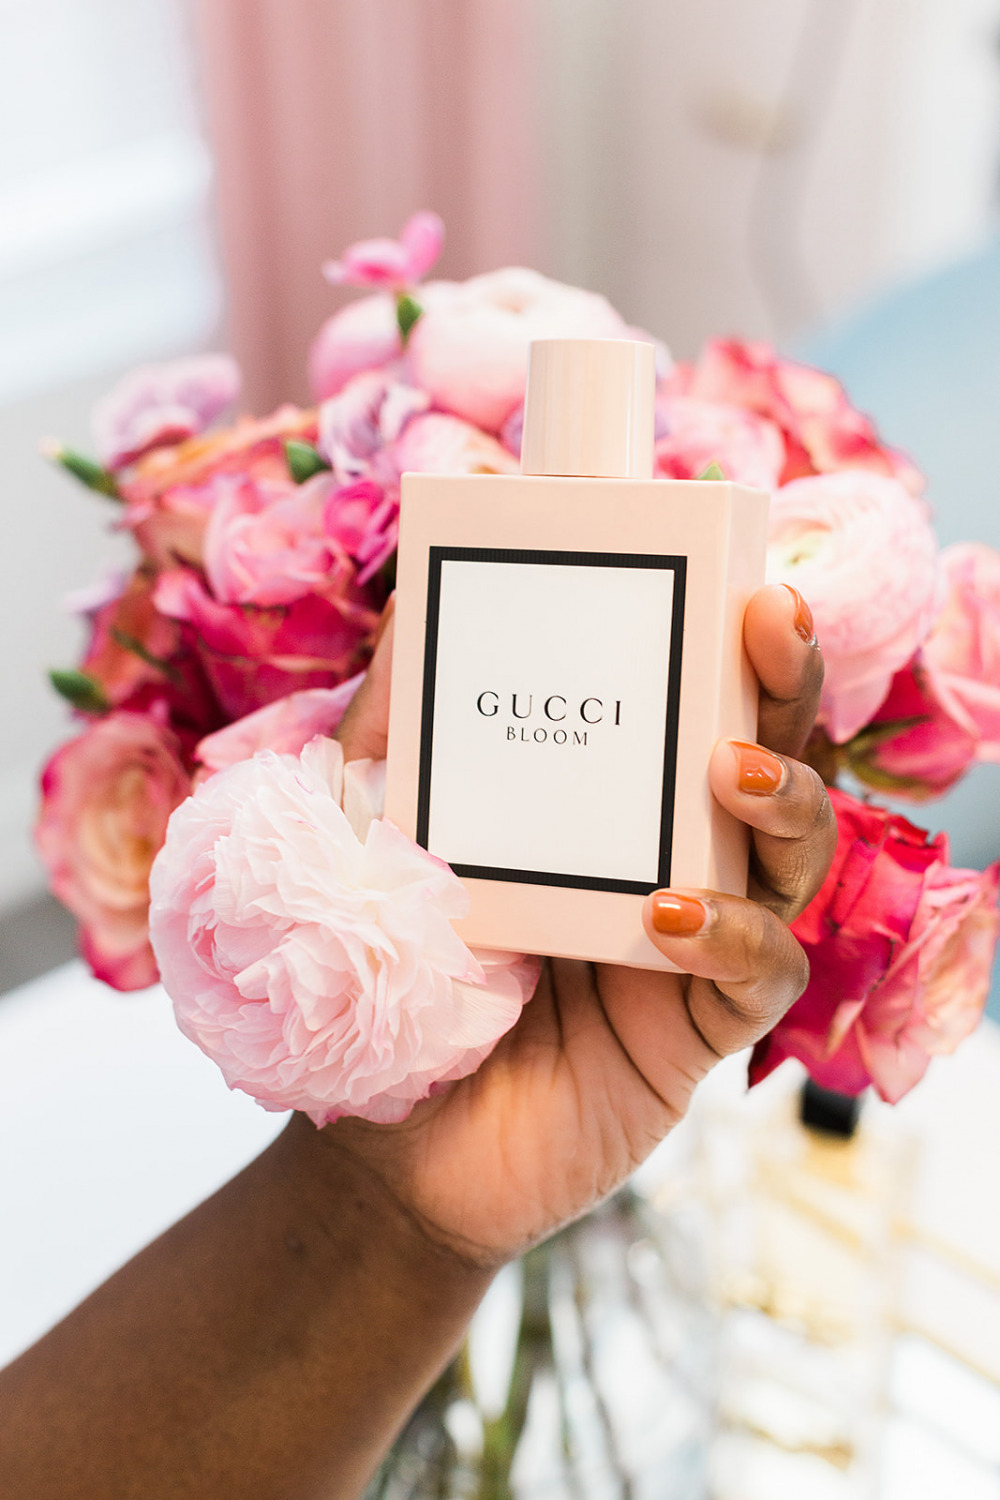 Gucci Bloom Perfume, Floral Bouquet, Pink Peonies, Pink Ranunculus, Perfume collection